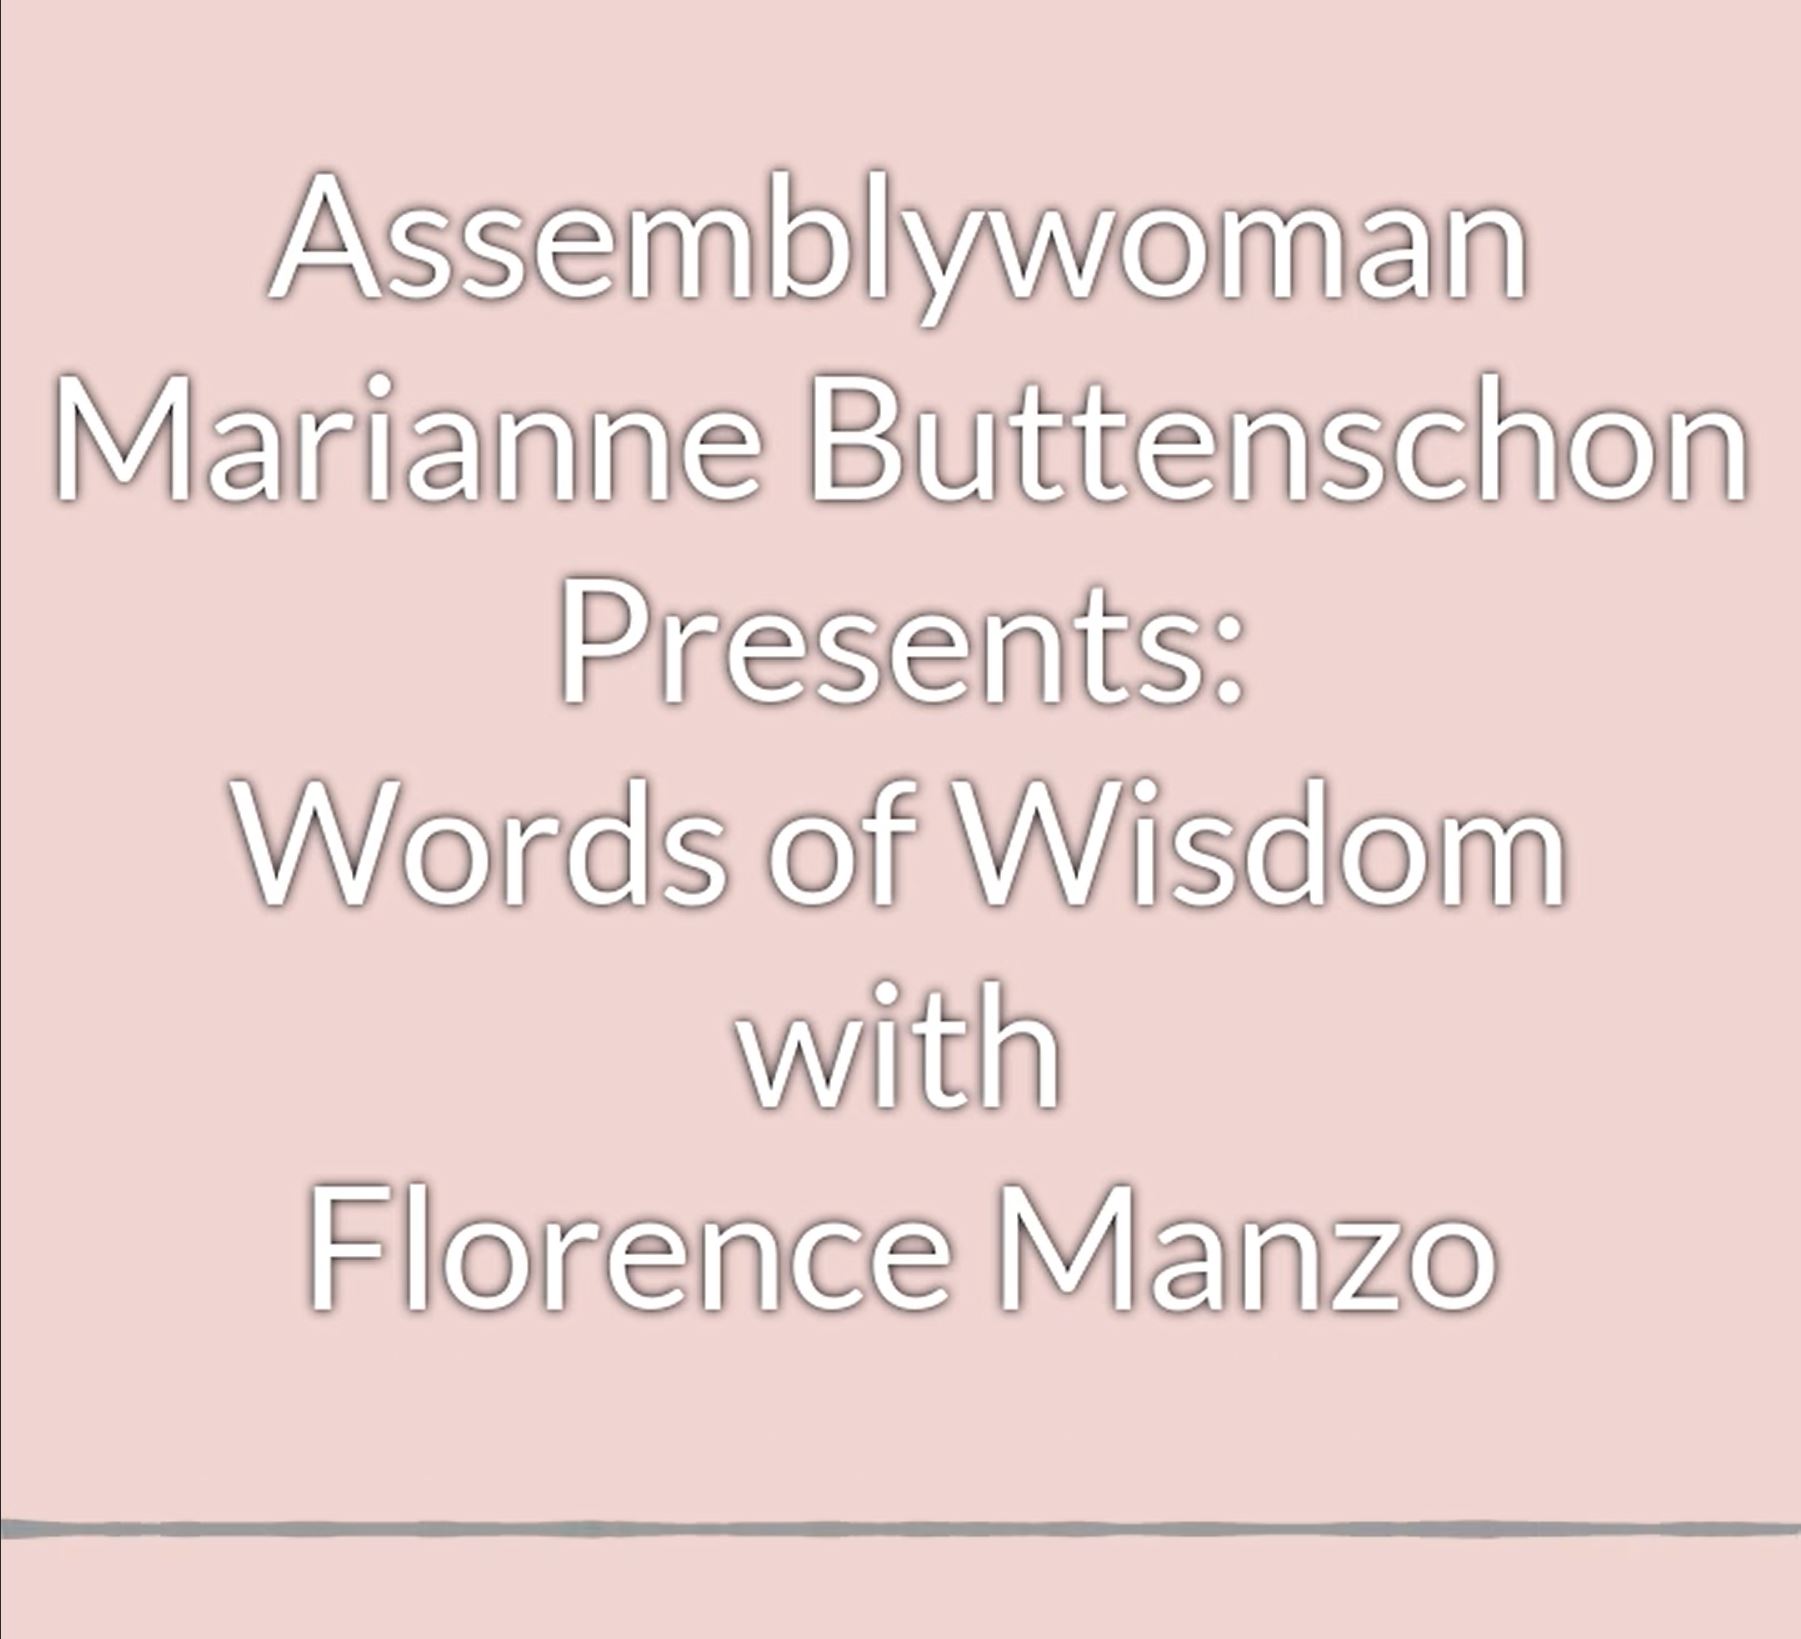 Words of Wisdom from Florence Manzo